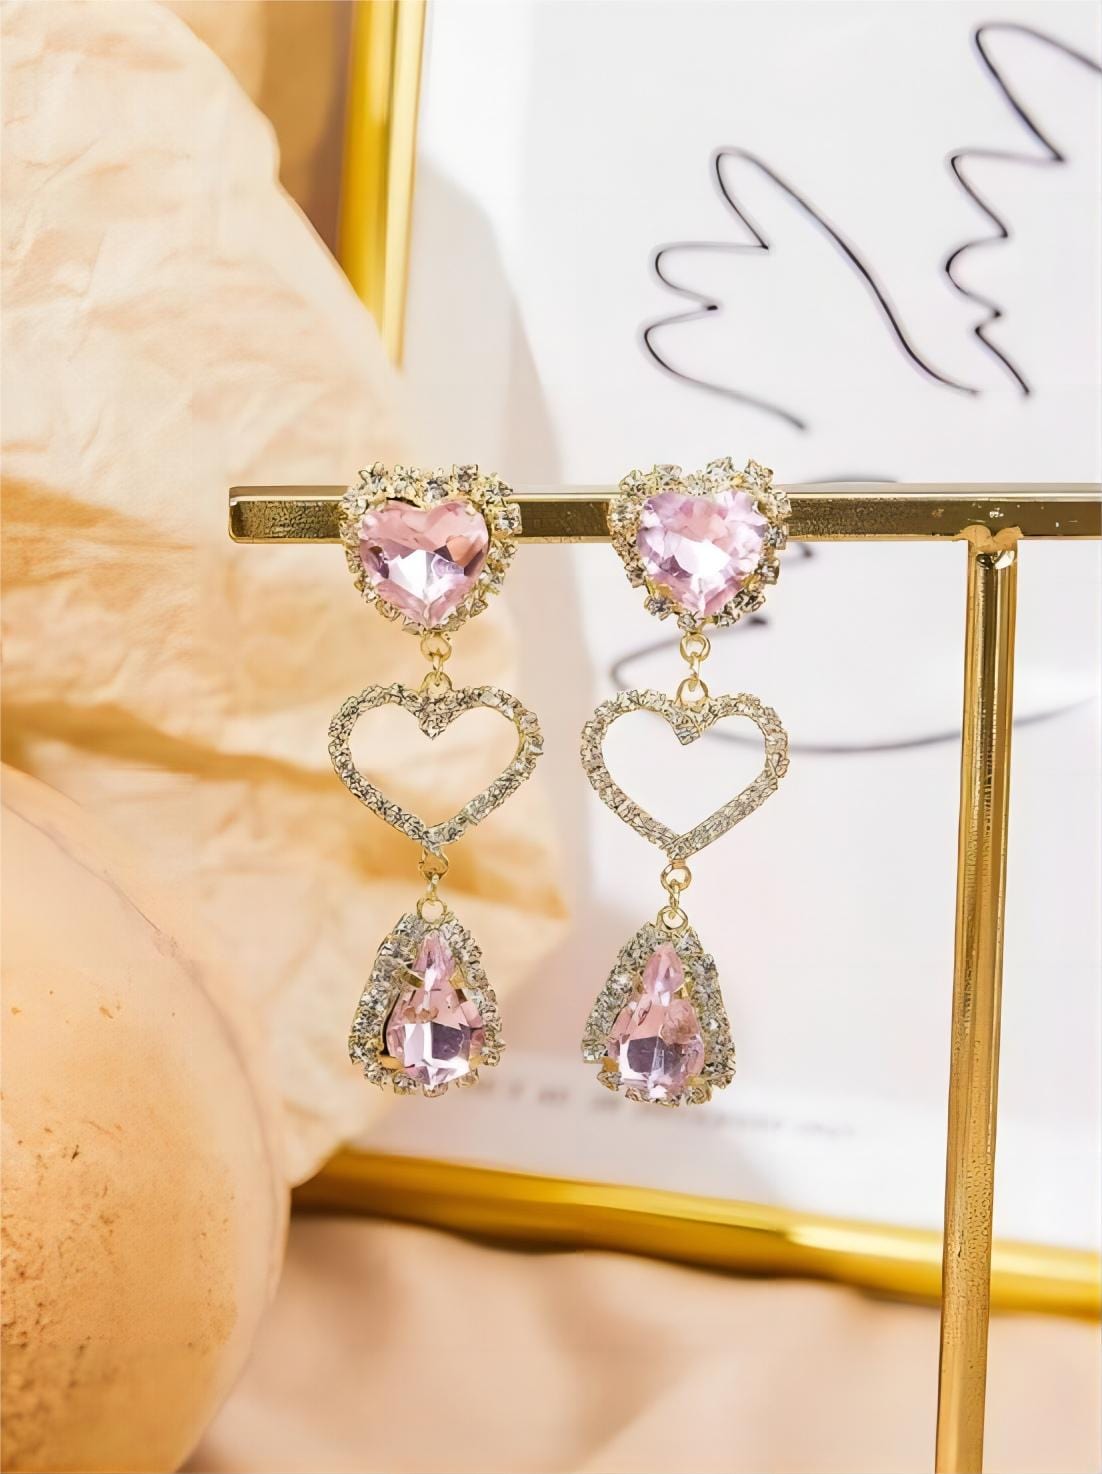 Chanel-Inspired Pink Crystal Heart Drop Earrings for a Romantic